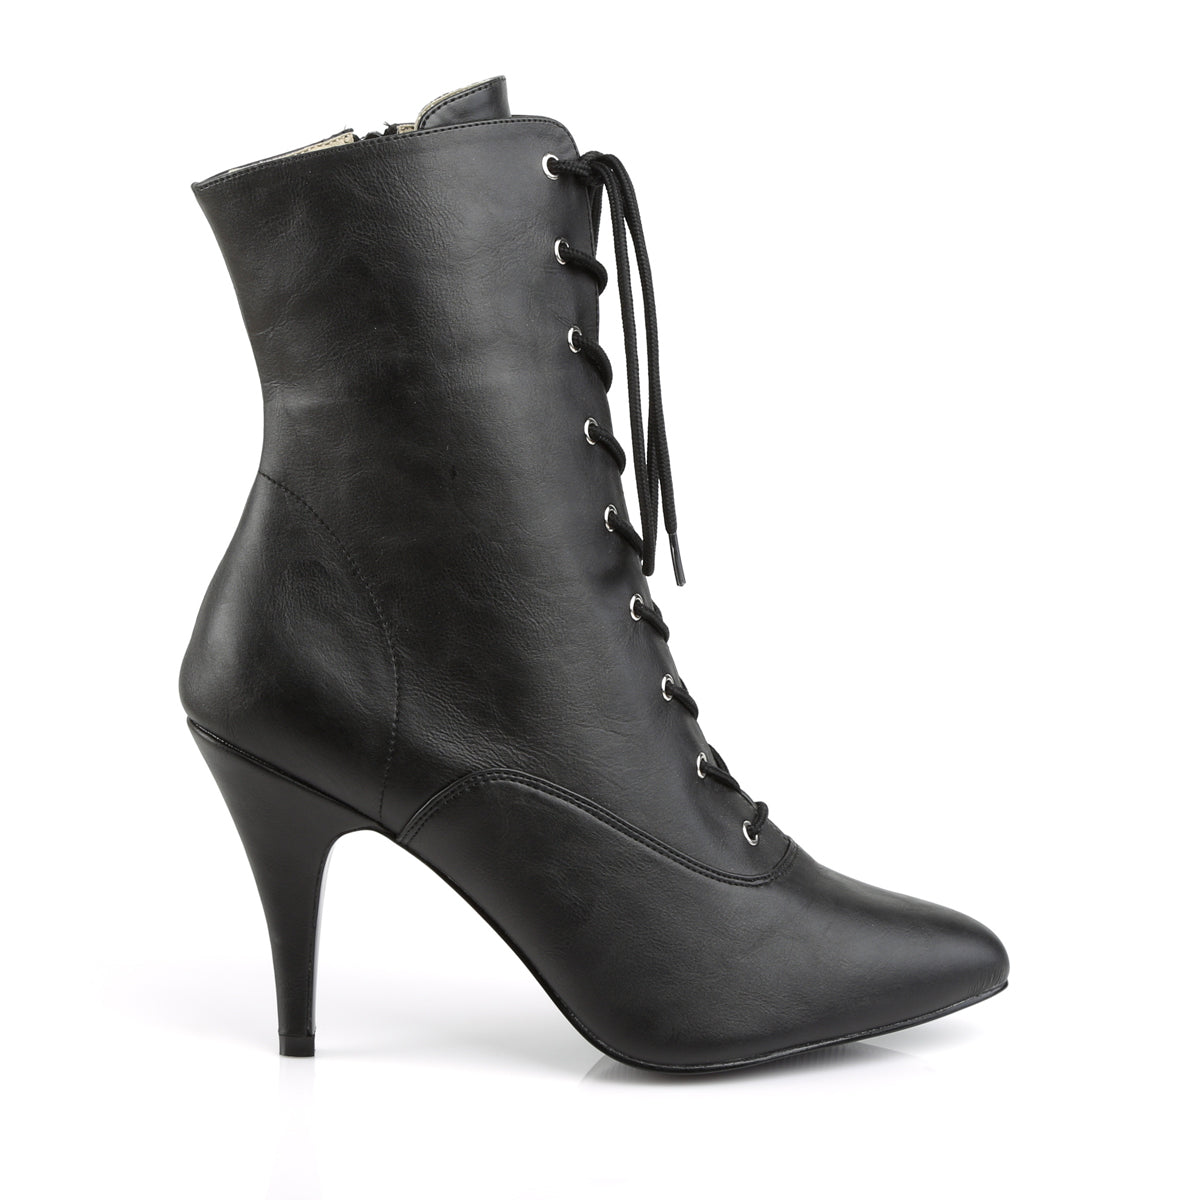 Dream Ankle Black Boots